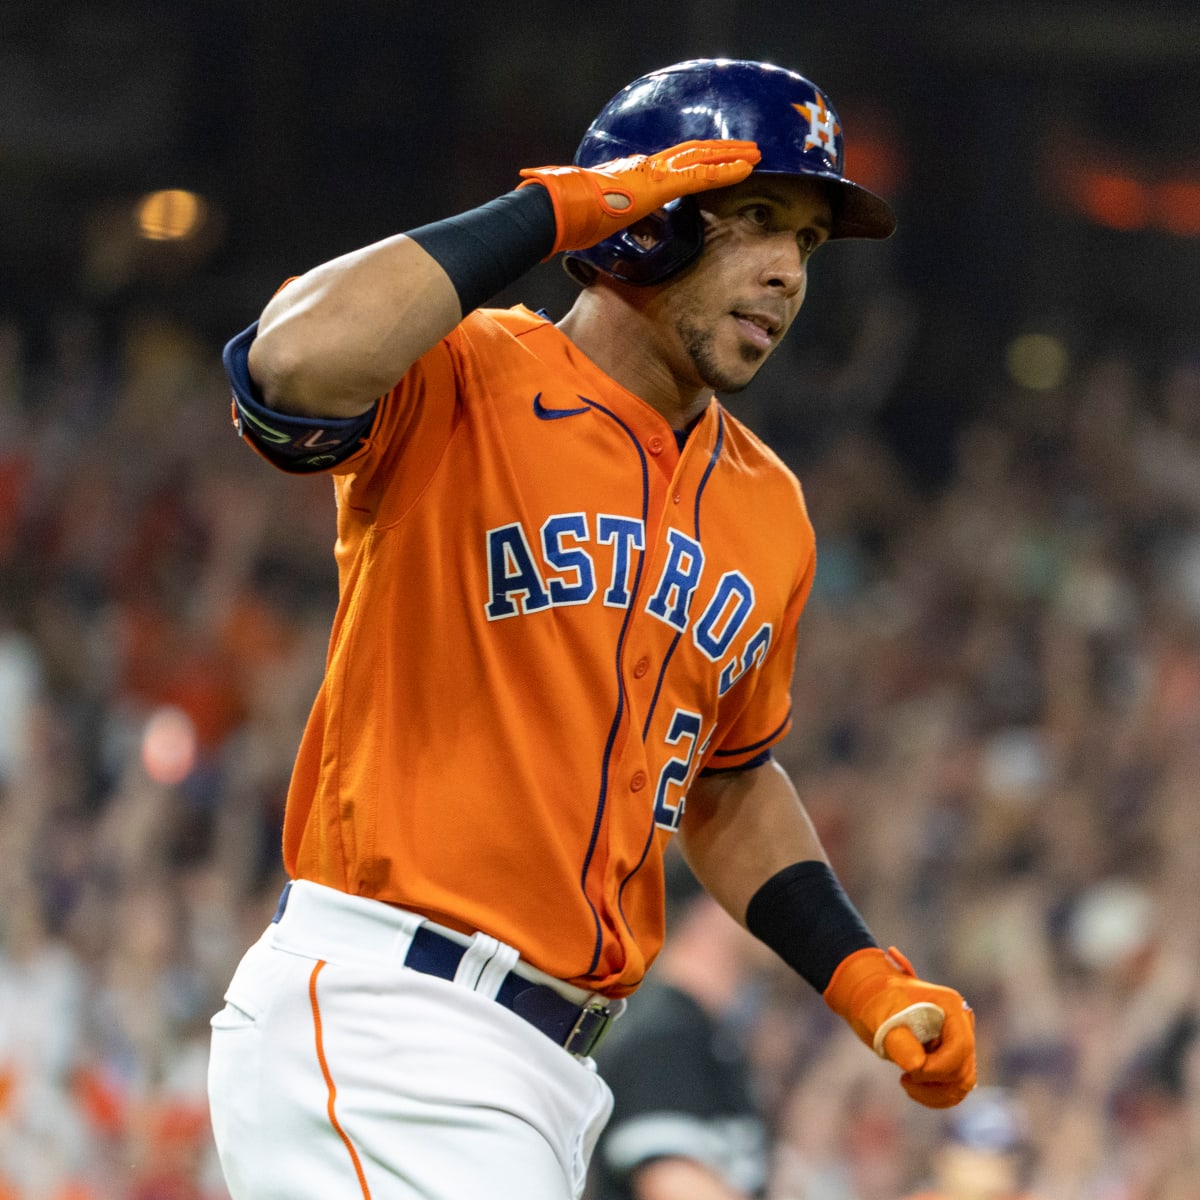 Astros Shock Baseball By Re-Signing Michael Brantley - The